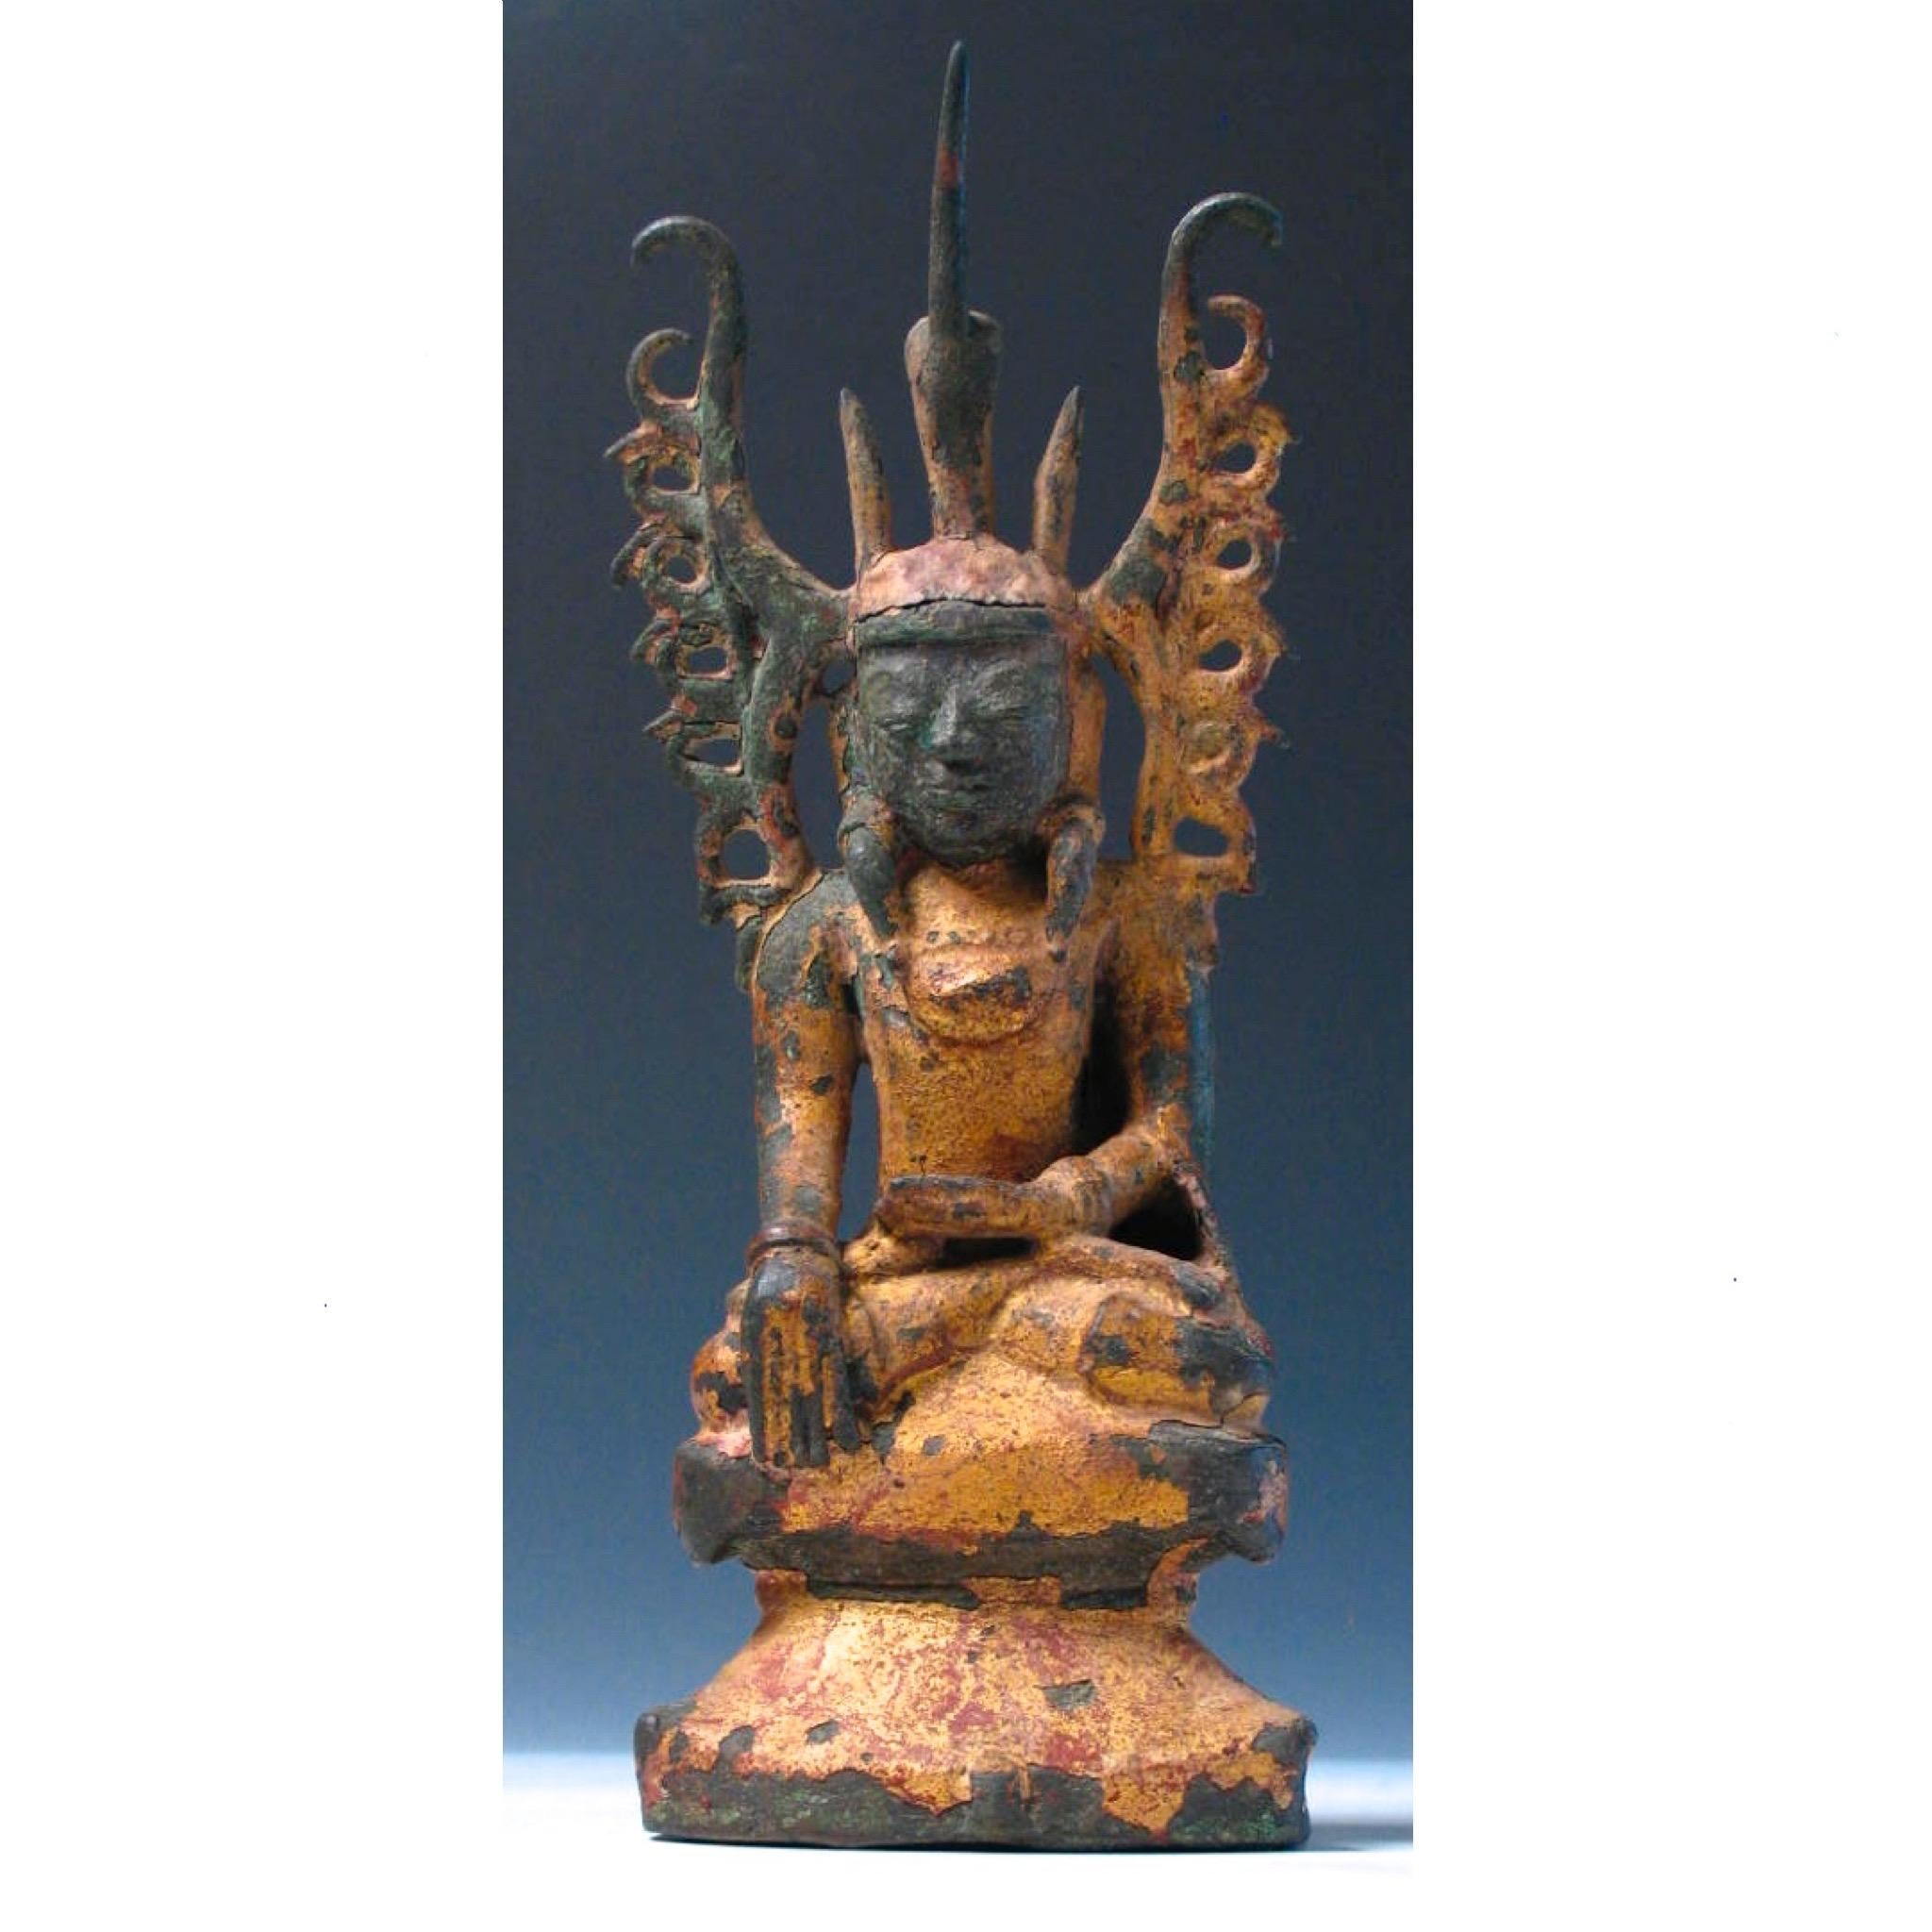 Arakanese Gilt Lacquered Bronze Mahakyain phara (Royal Oath) Buddha Image, a seated figure depicted in the bhumisparsa (earth touching) mudra, with small “fruit” in left hand, a majestic figure with elaborate crown, hairstyle and protruding